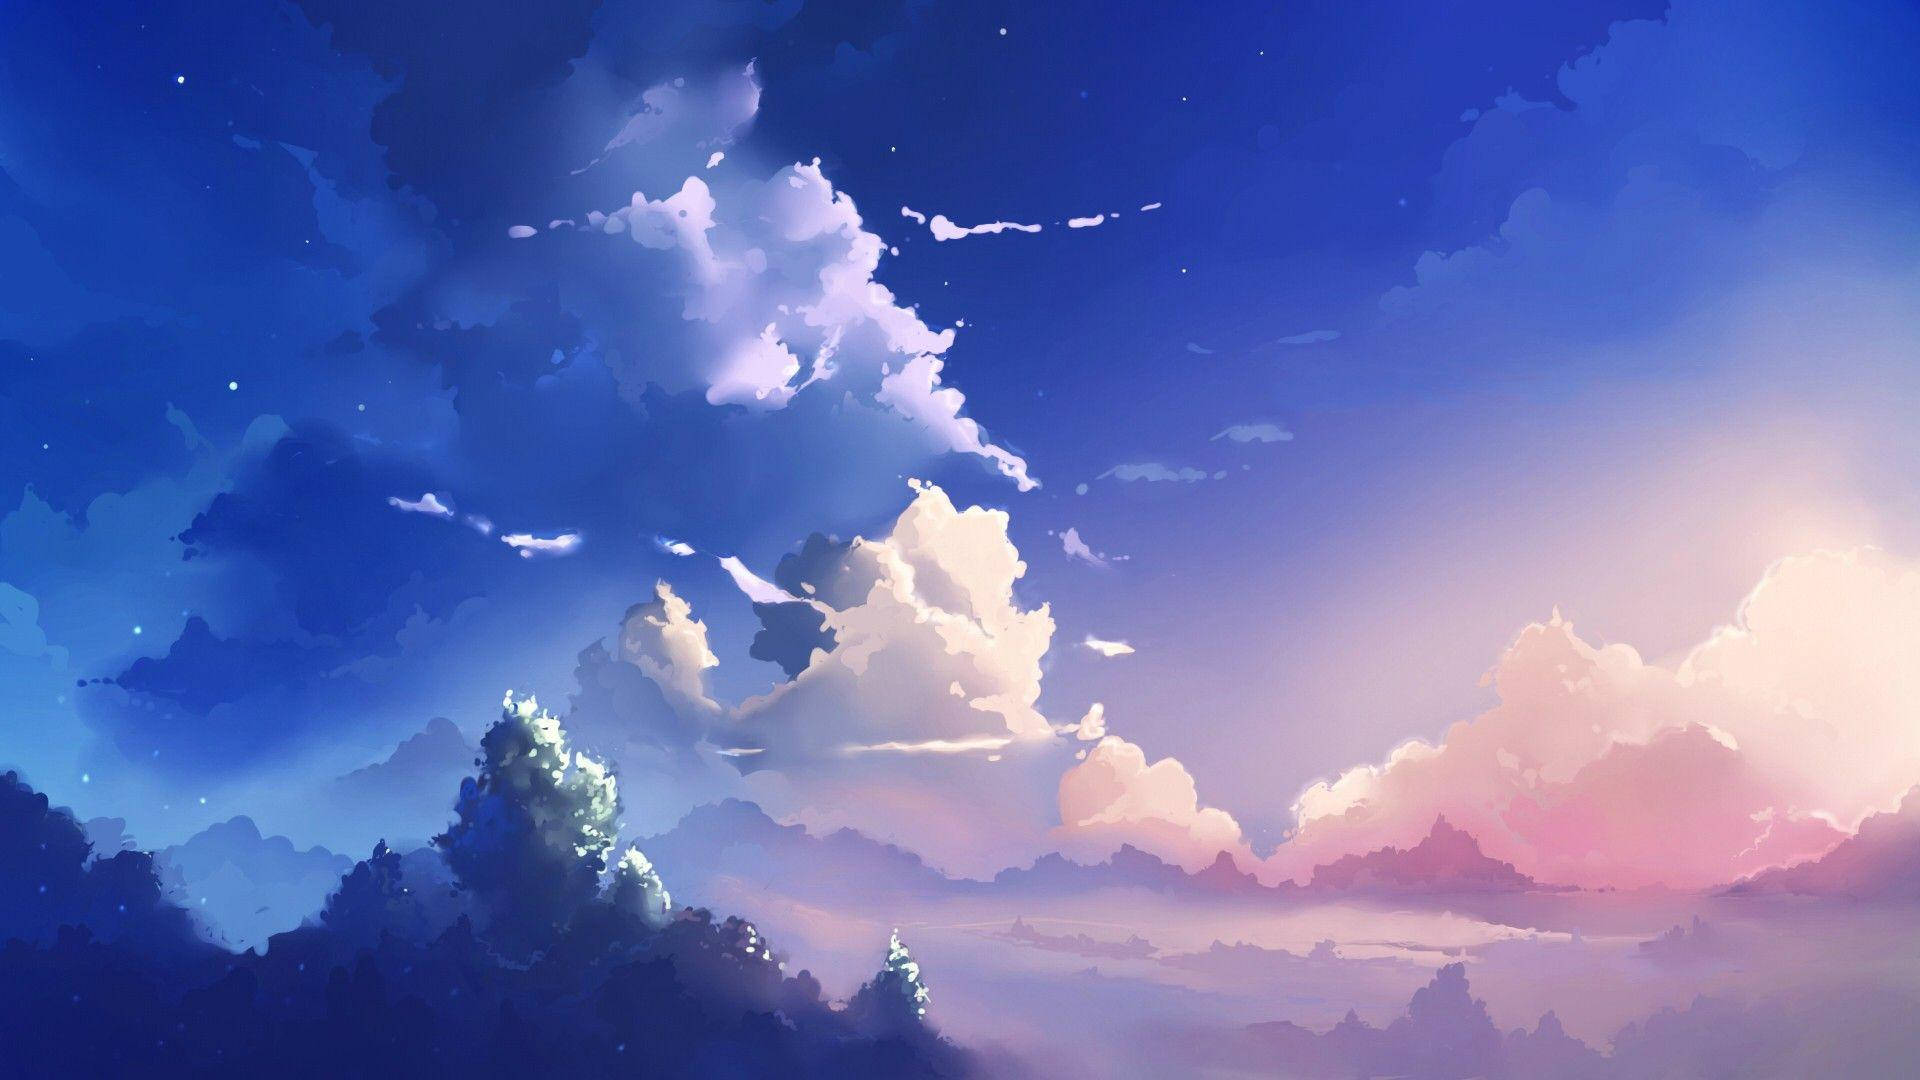 Twilight Clouds Aesthetic Anime Scenery Background